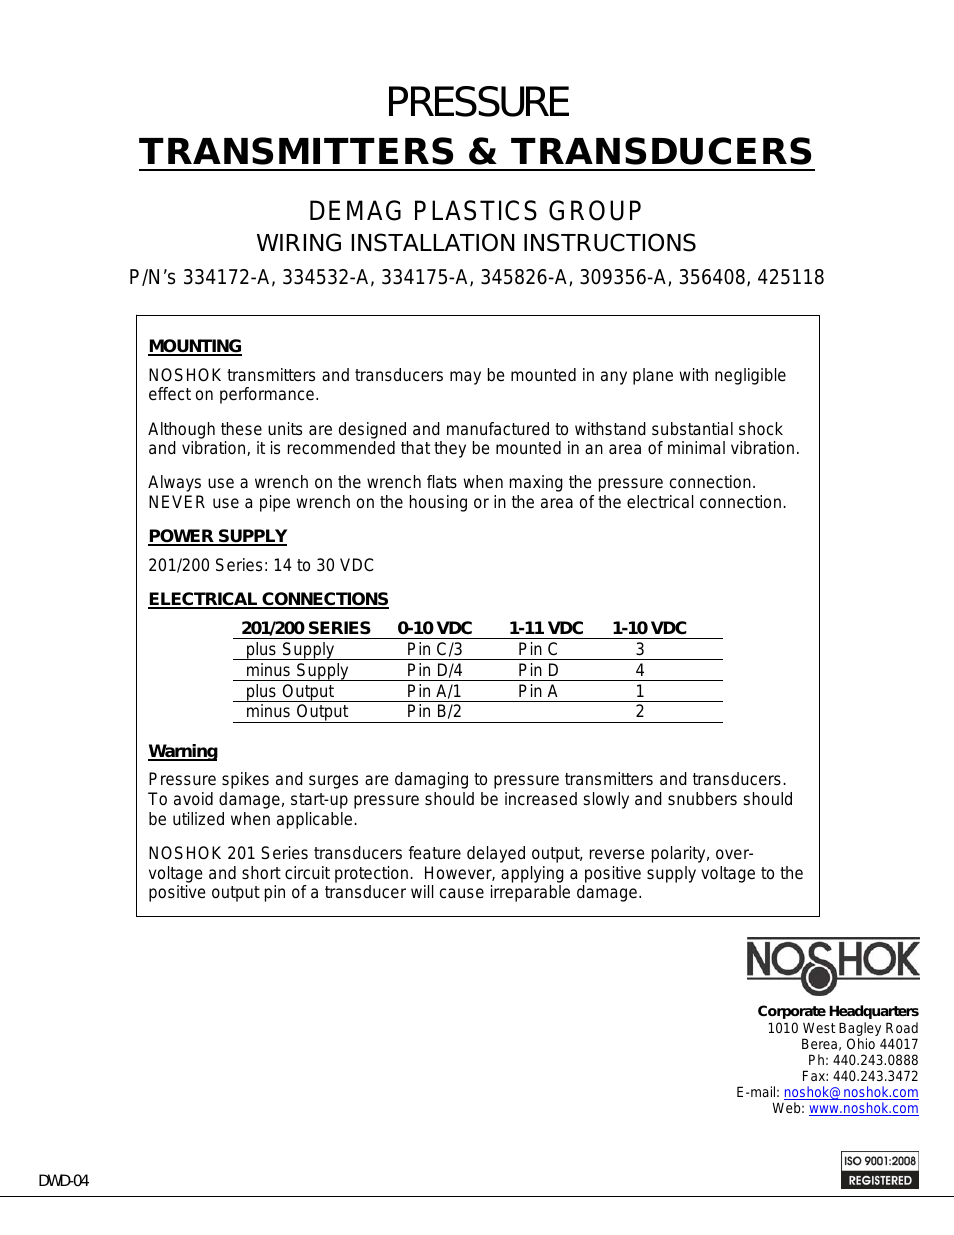 Pressure Transmitters & Transducers Demag Plastics Group Wiring